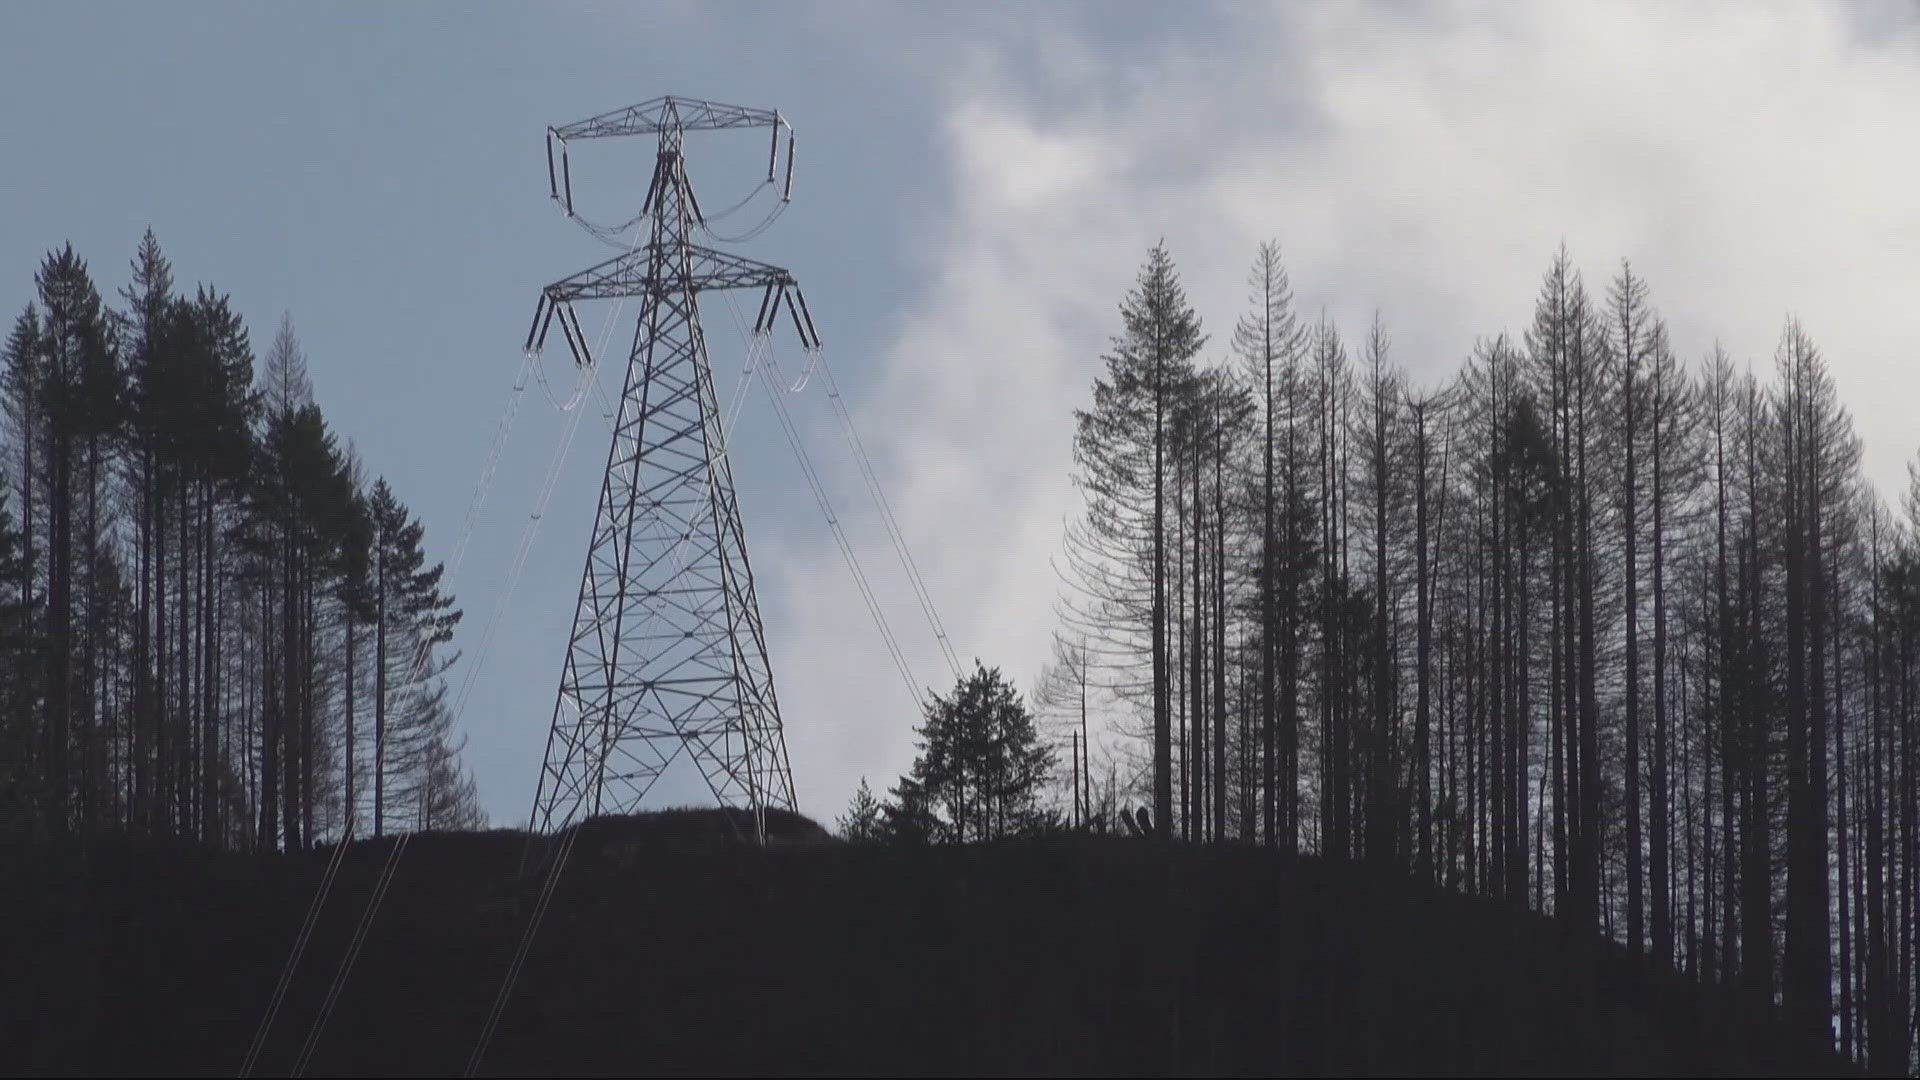 PGE filed a request to raise rates by another 7.4% in 2025 to the Oregon Public Utility Commission.